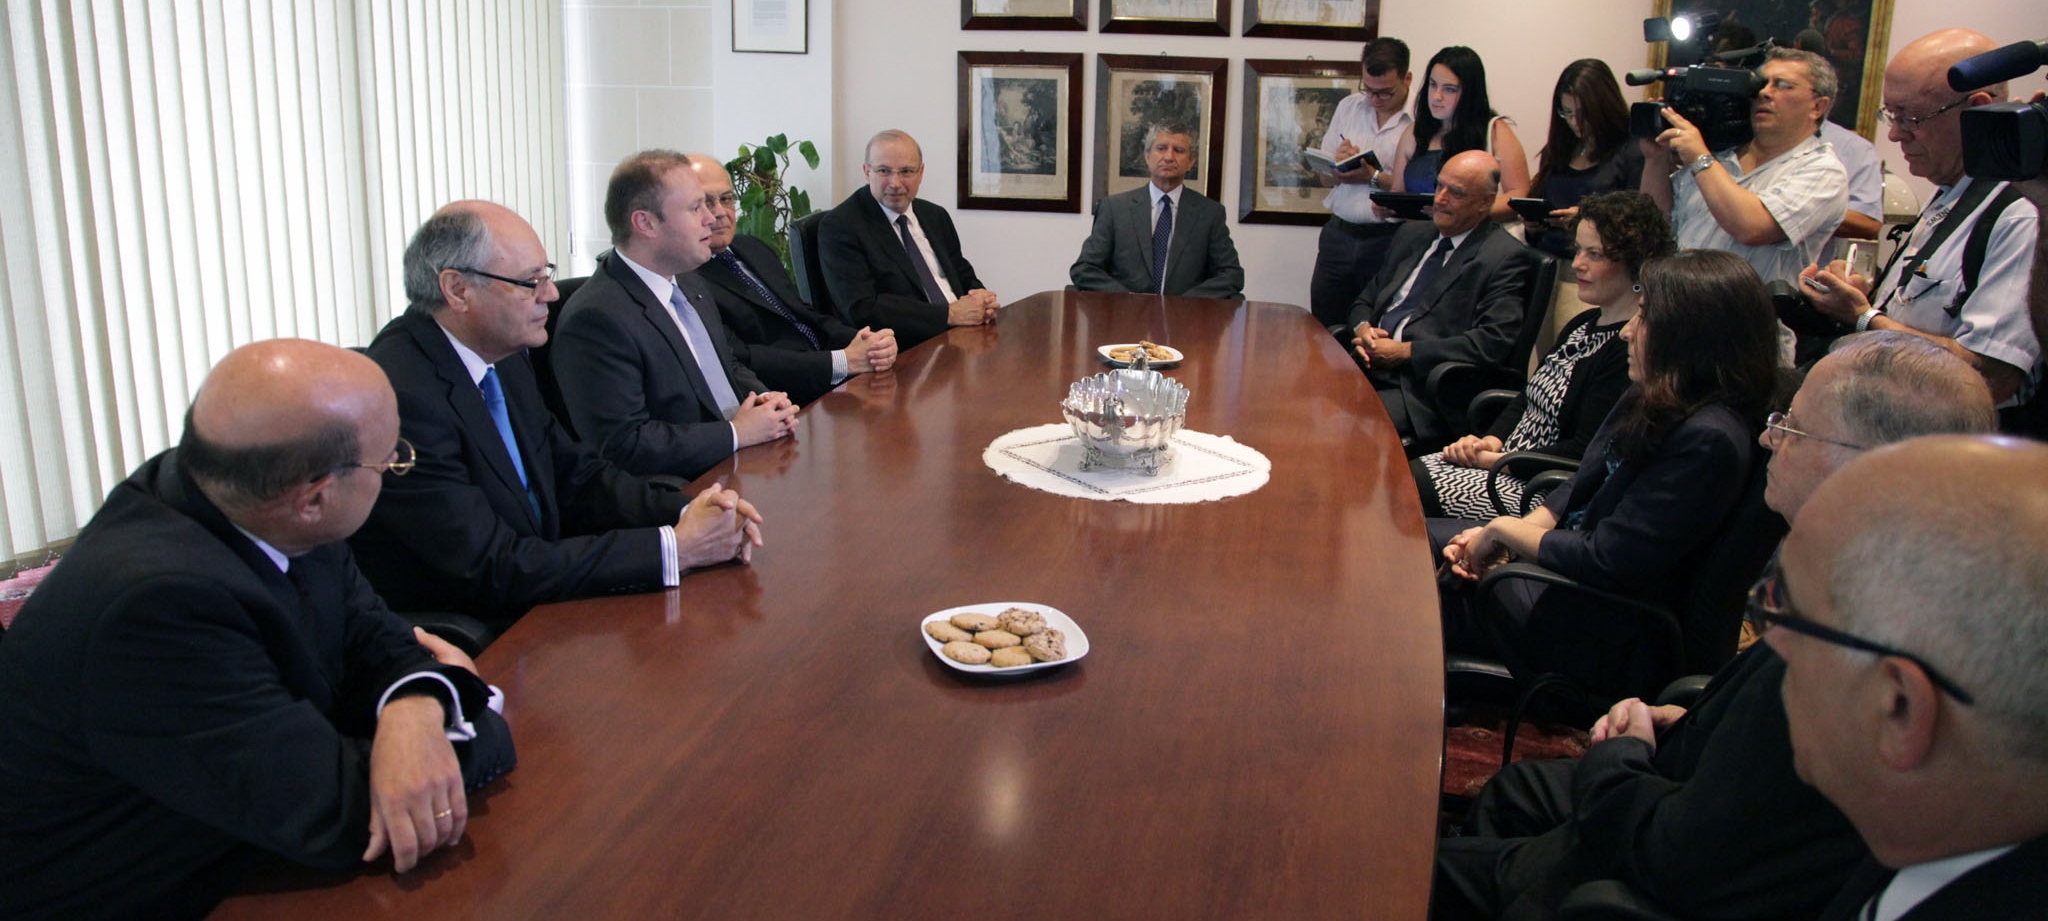 Prime Minister Joseph Muscat and Finance Minister Prof. Edward Scicluna visit Malta Financial Services Authority